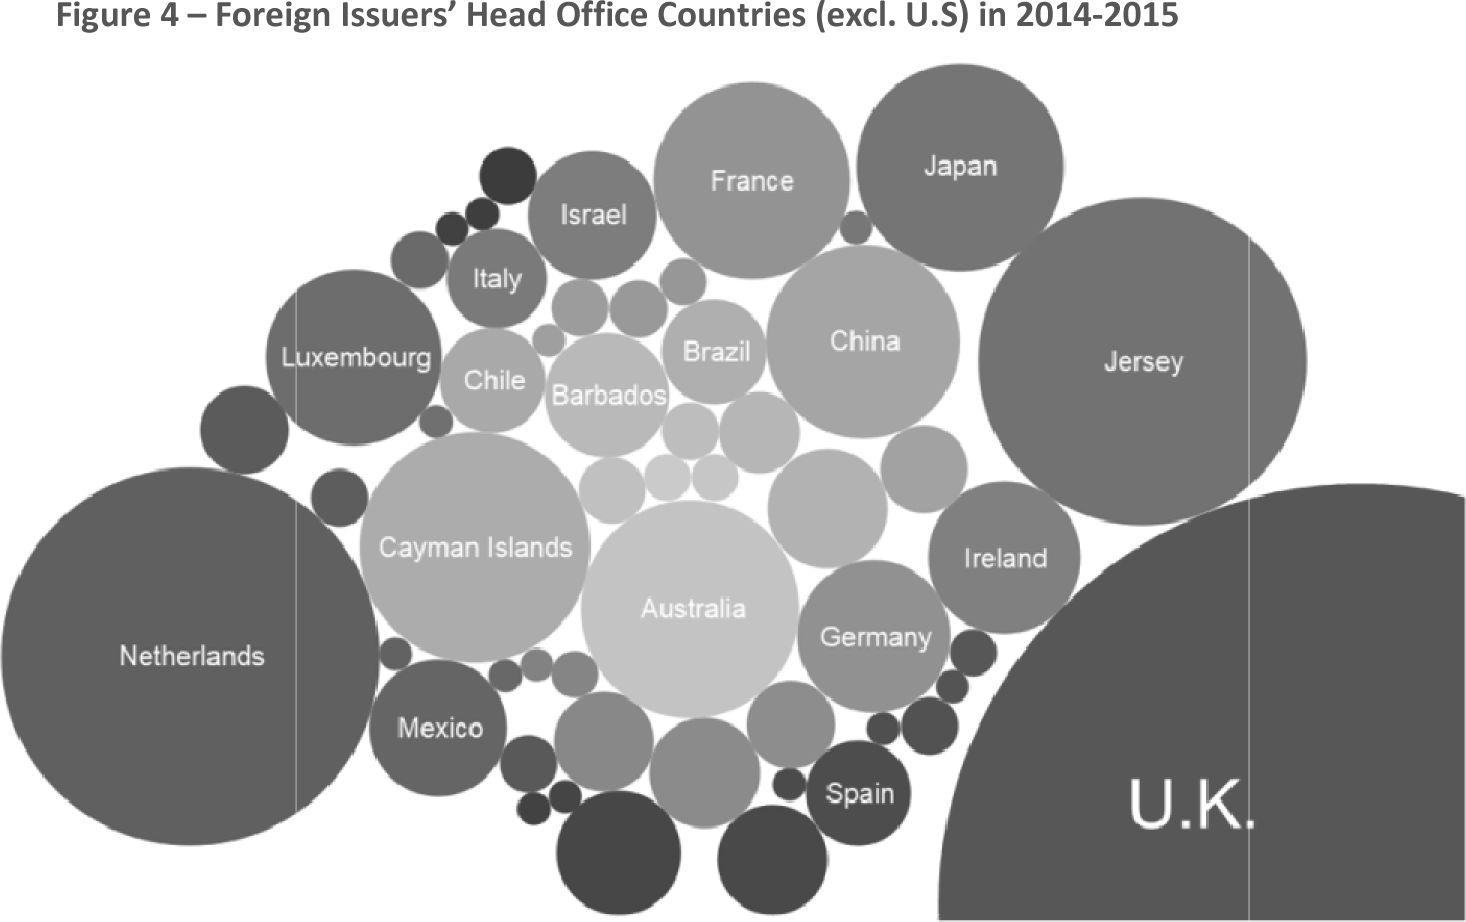 Figure 4 -- Foreign Issuers' Head Office Countries (excl. U.S) in 2014-2015